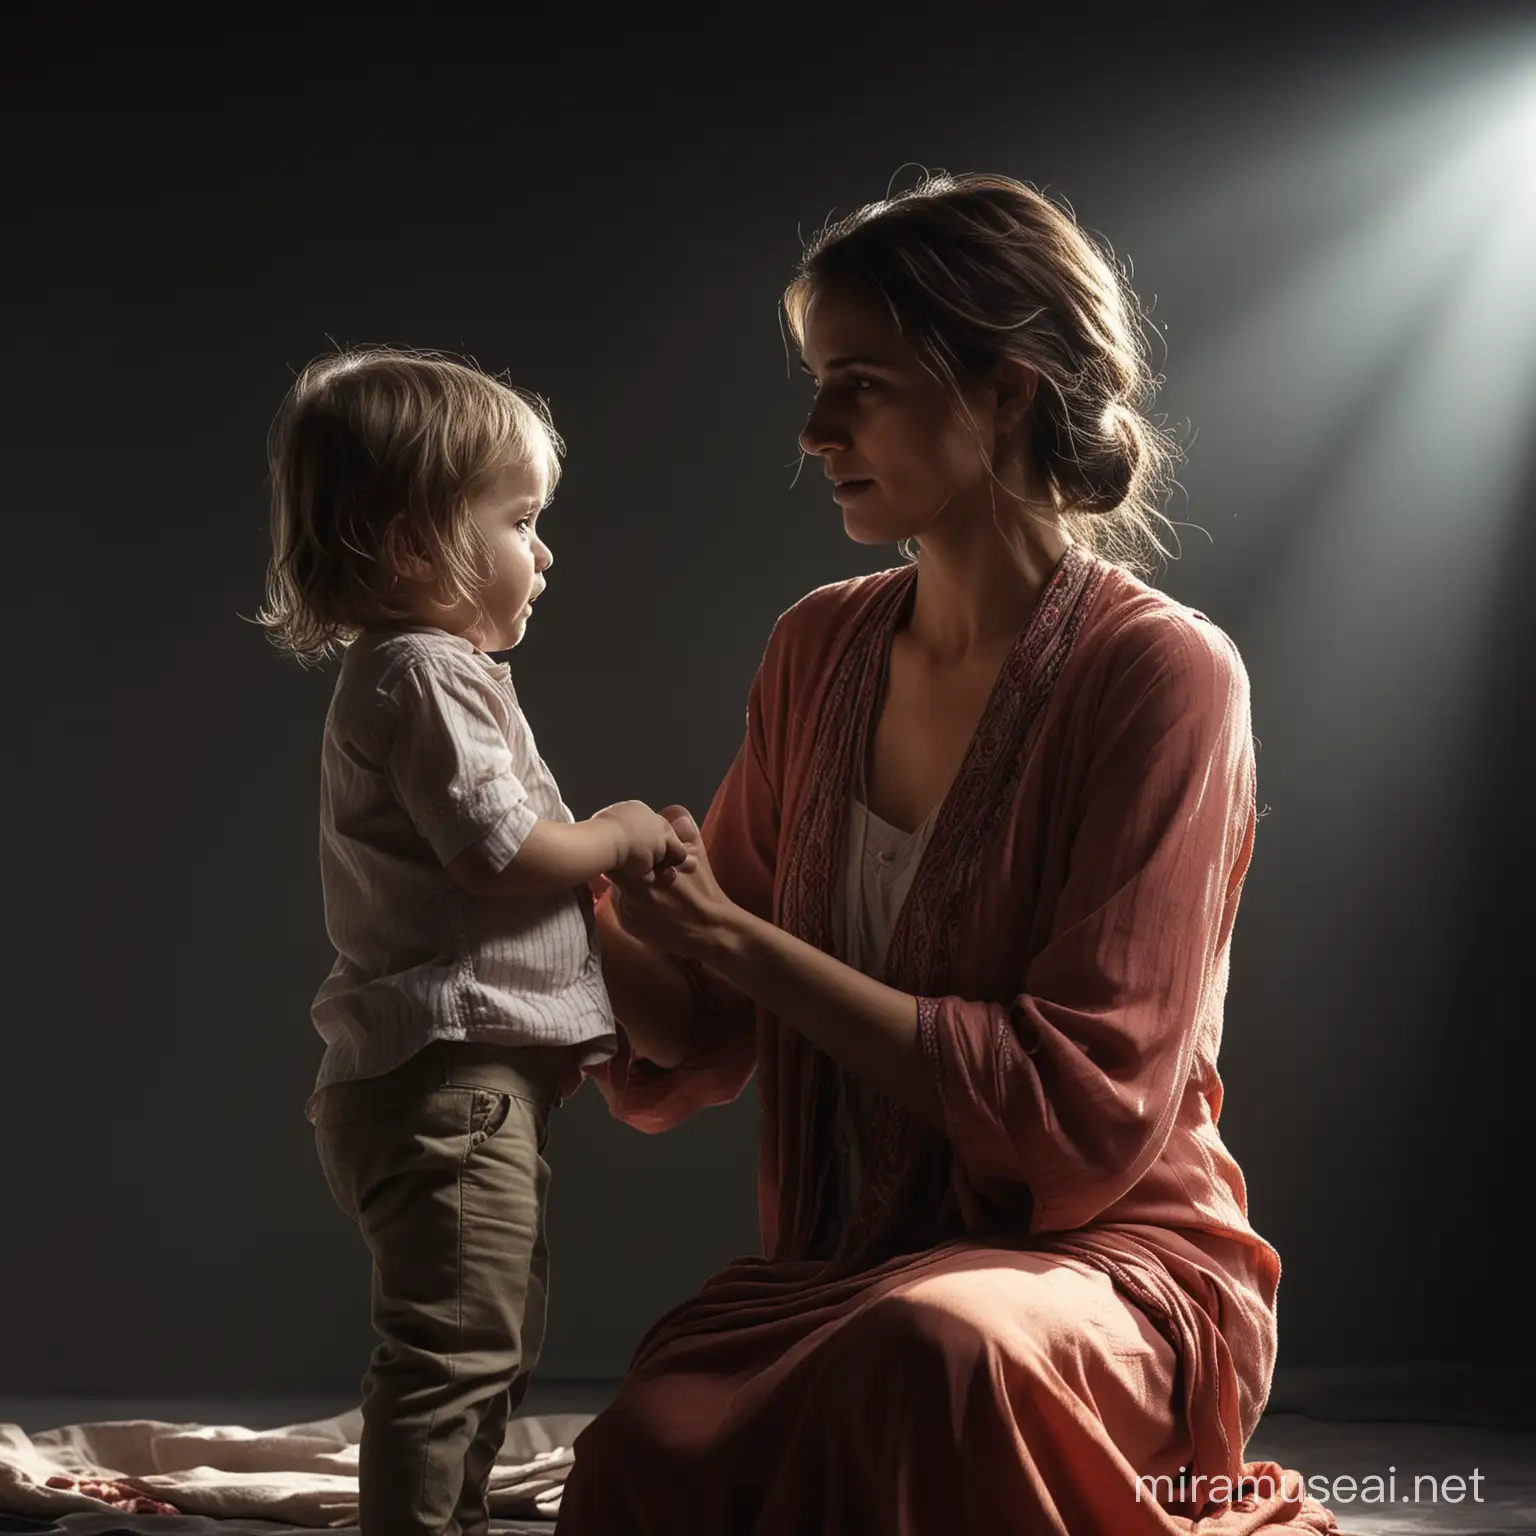 Mother Selling by Her Child in Flowing Clothes with Dramatic Lighting High Definition Image with Detailed Features